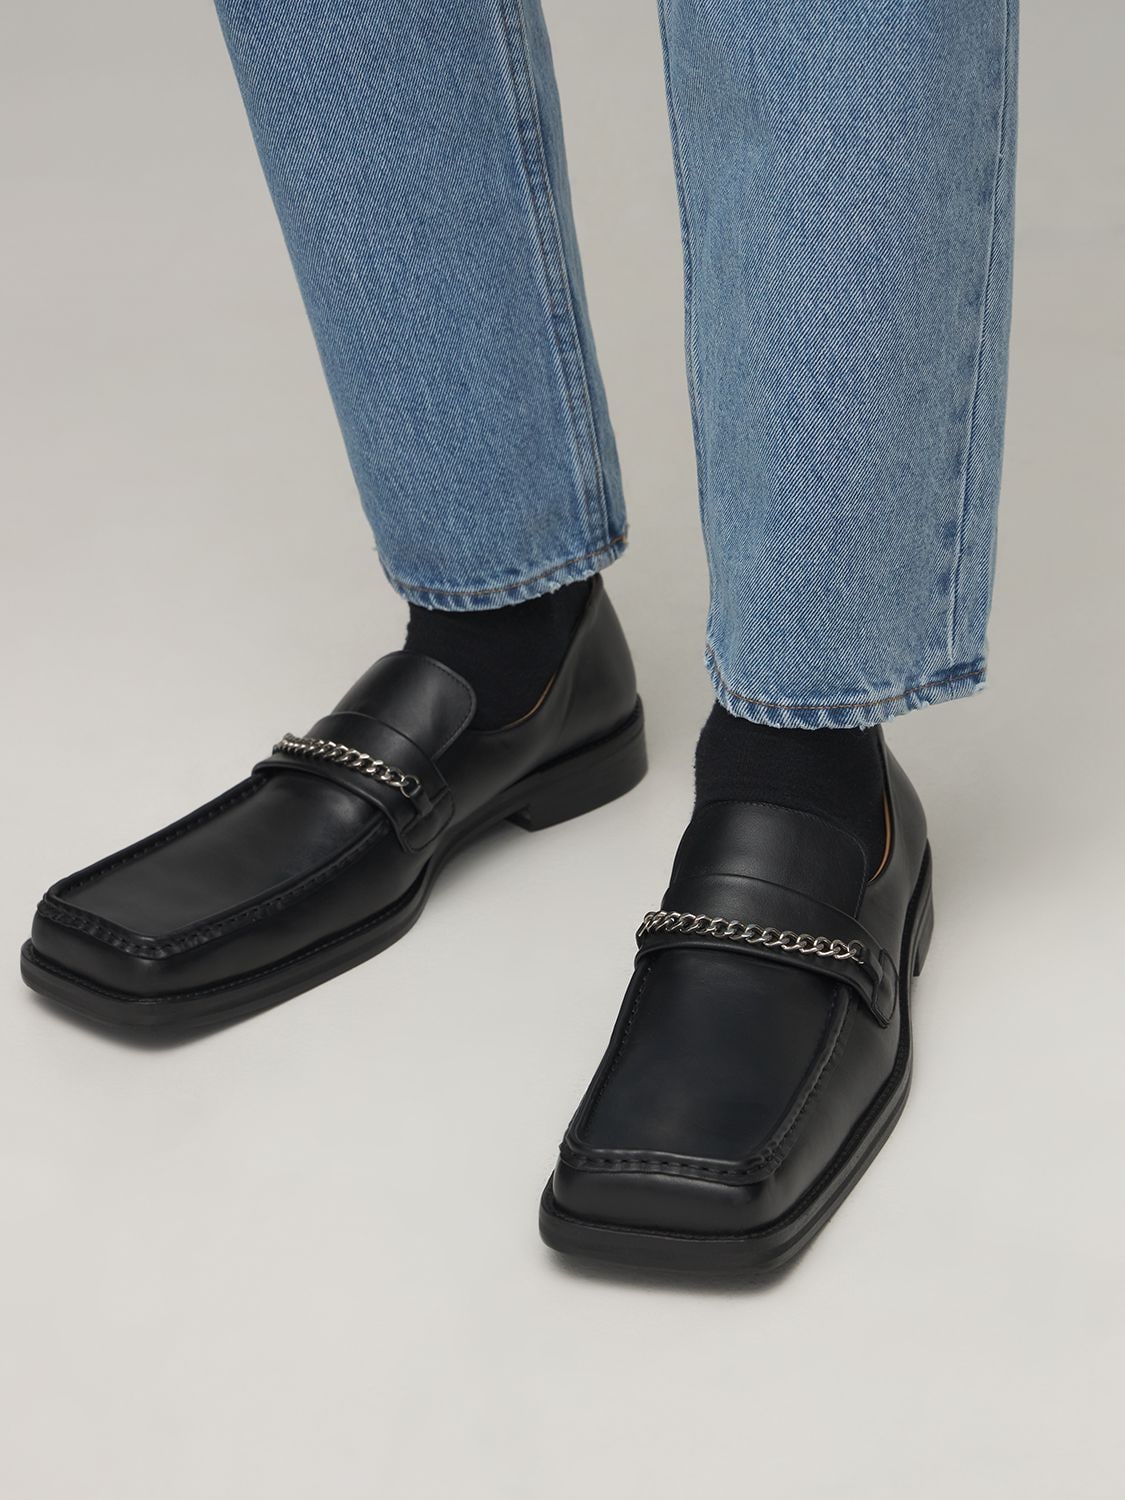 3.5cm Leather Square Toe Loafers In Black High Shine